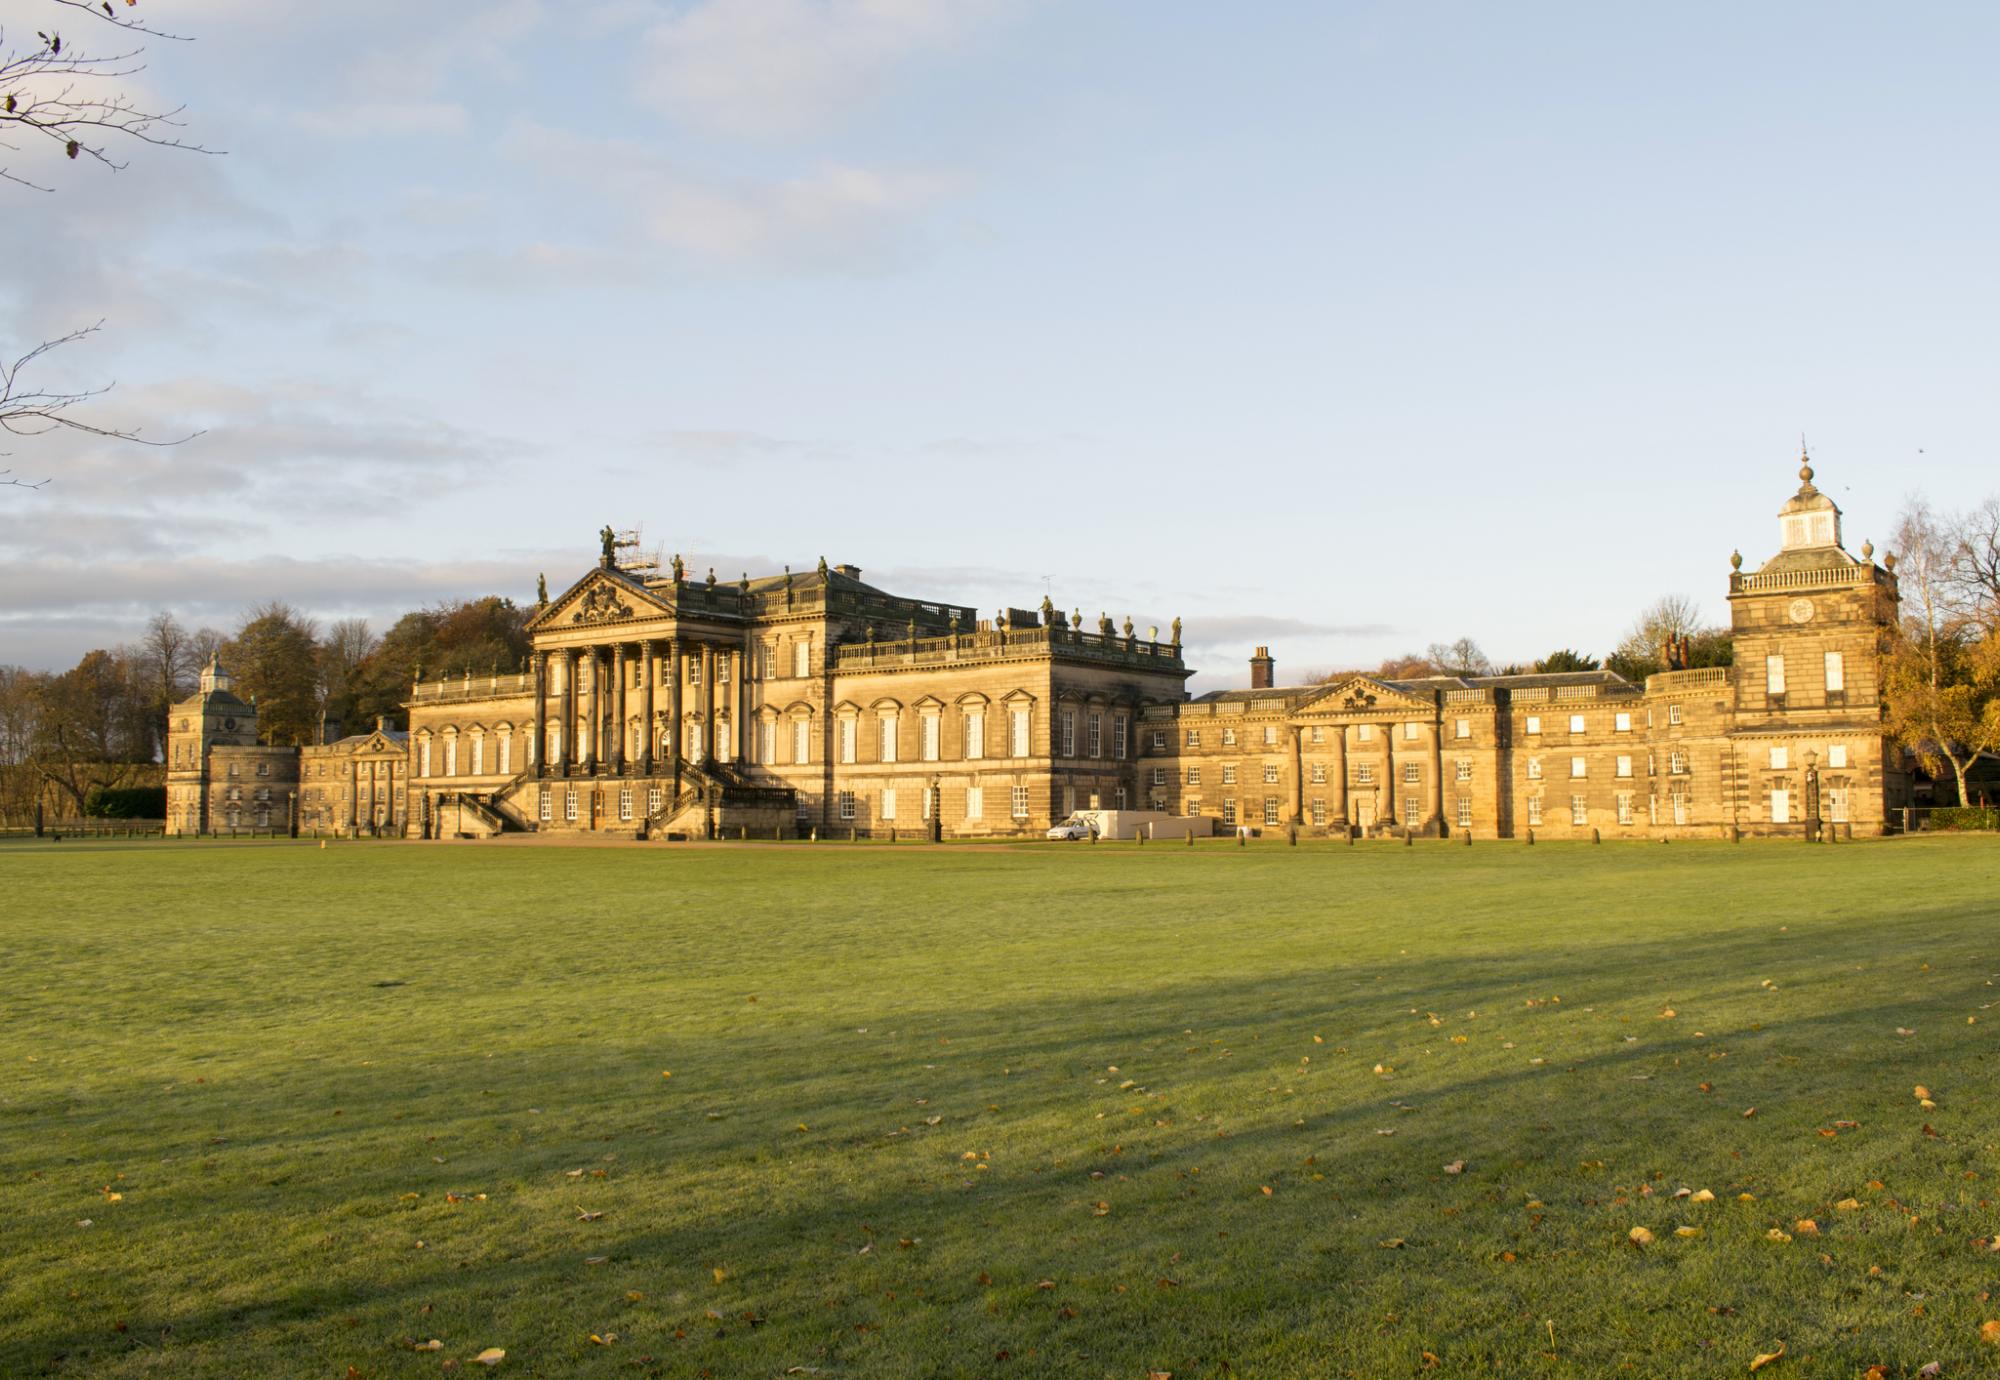 Wentworth Woodhouse pictured at golden hour.